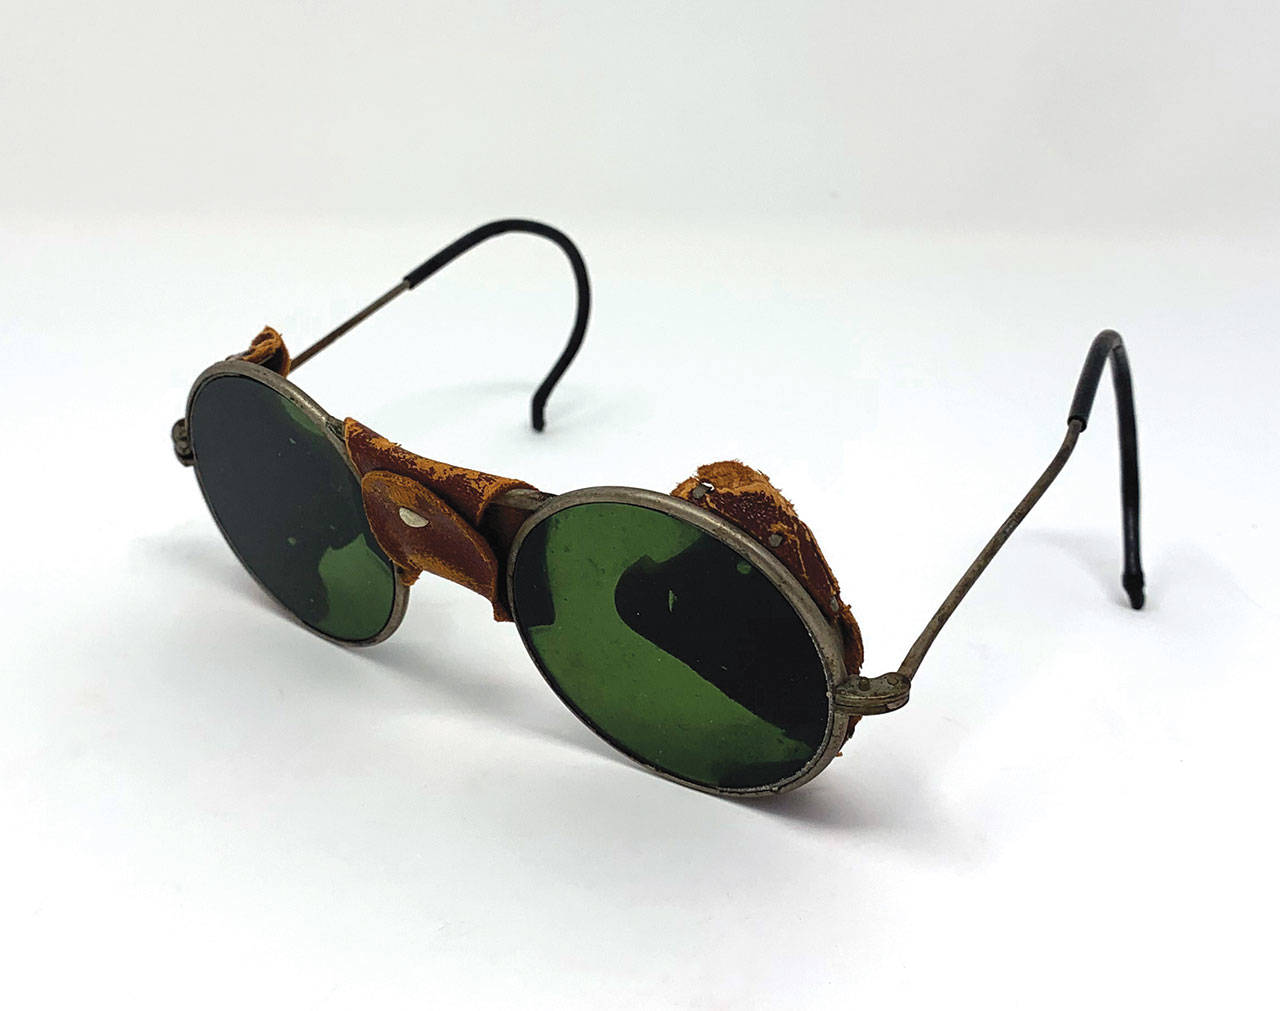 This is a very early pair of glasses with tinted lenses not used as sunglasses. (Cowles Syndicate Inc.)